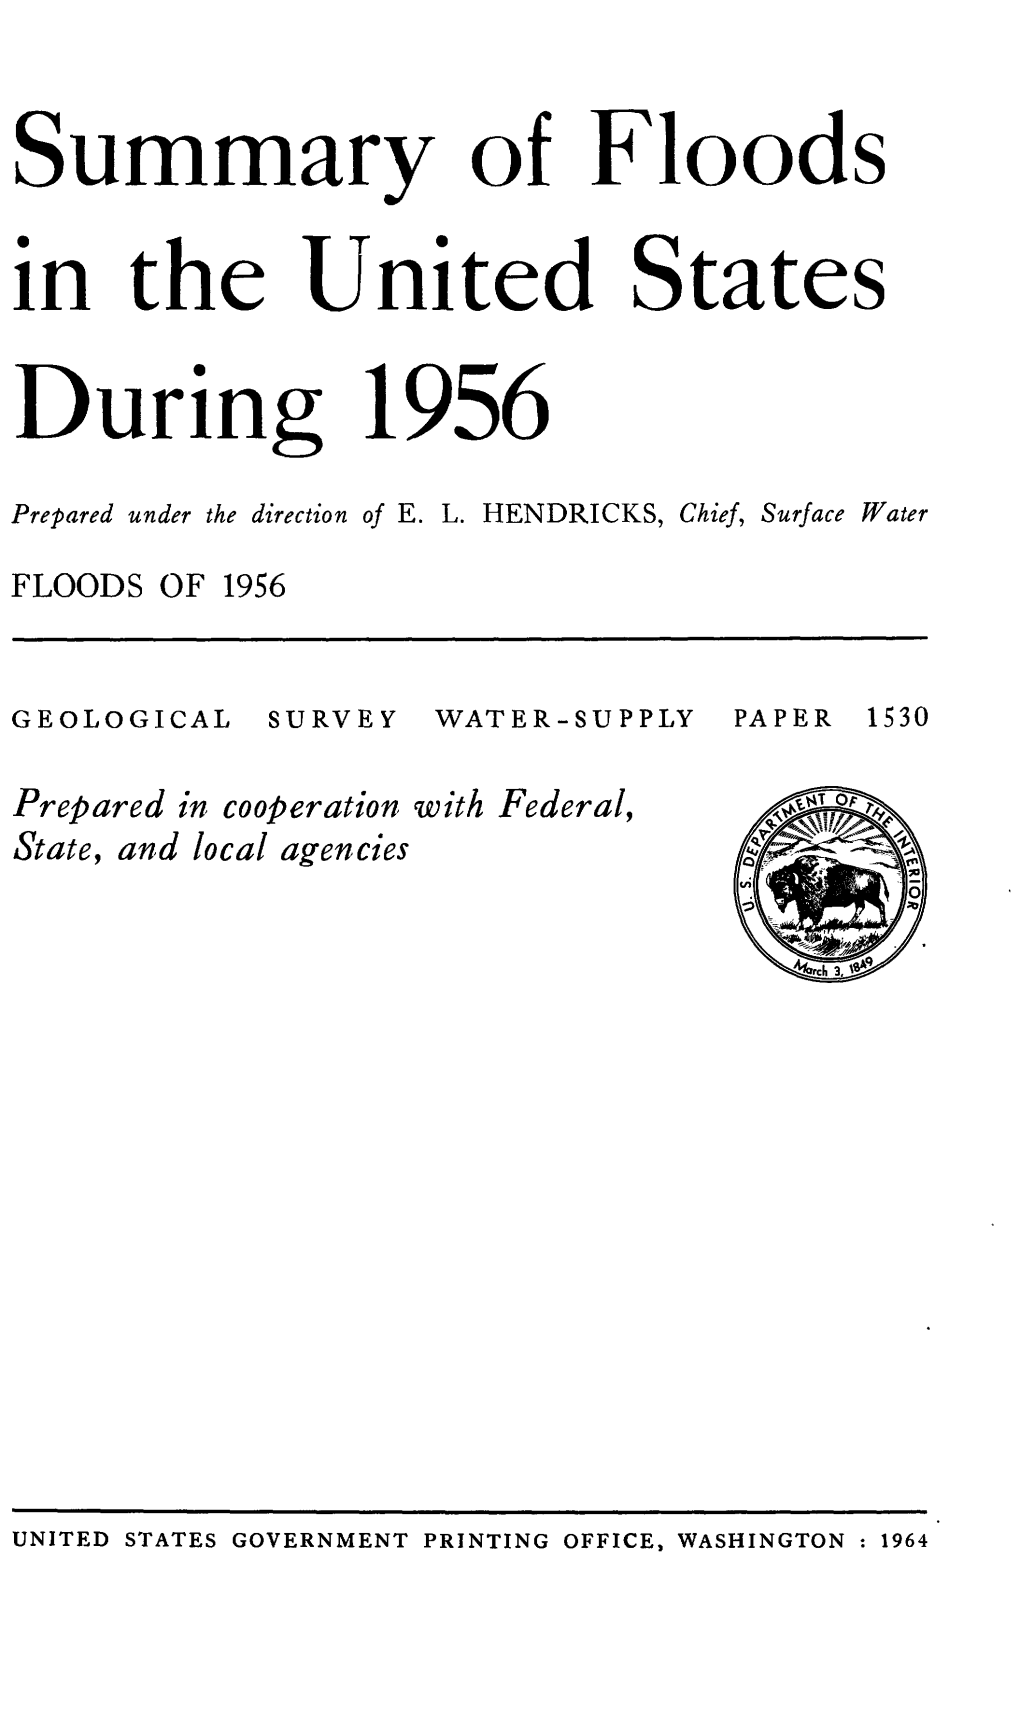 Summary of Floods in the United States During 1956